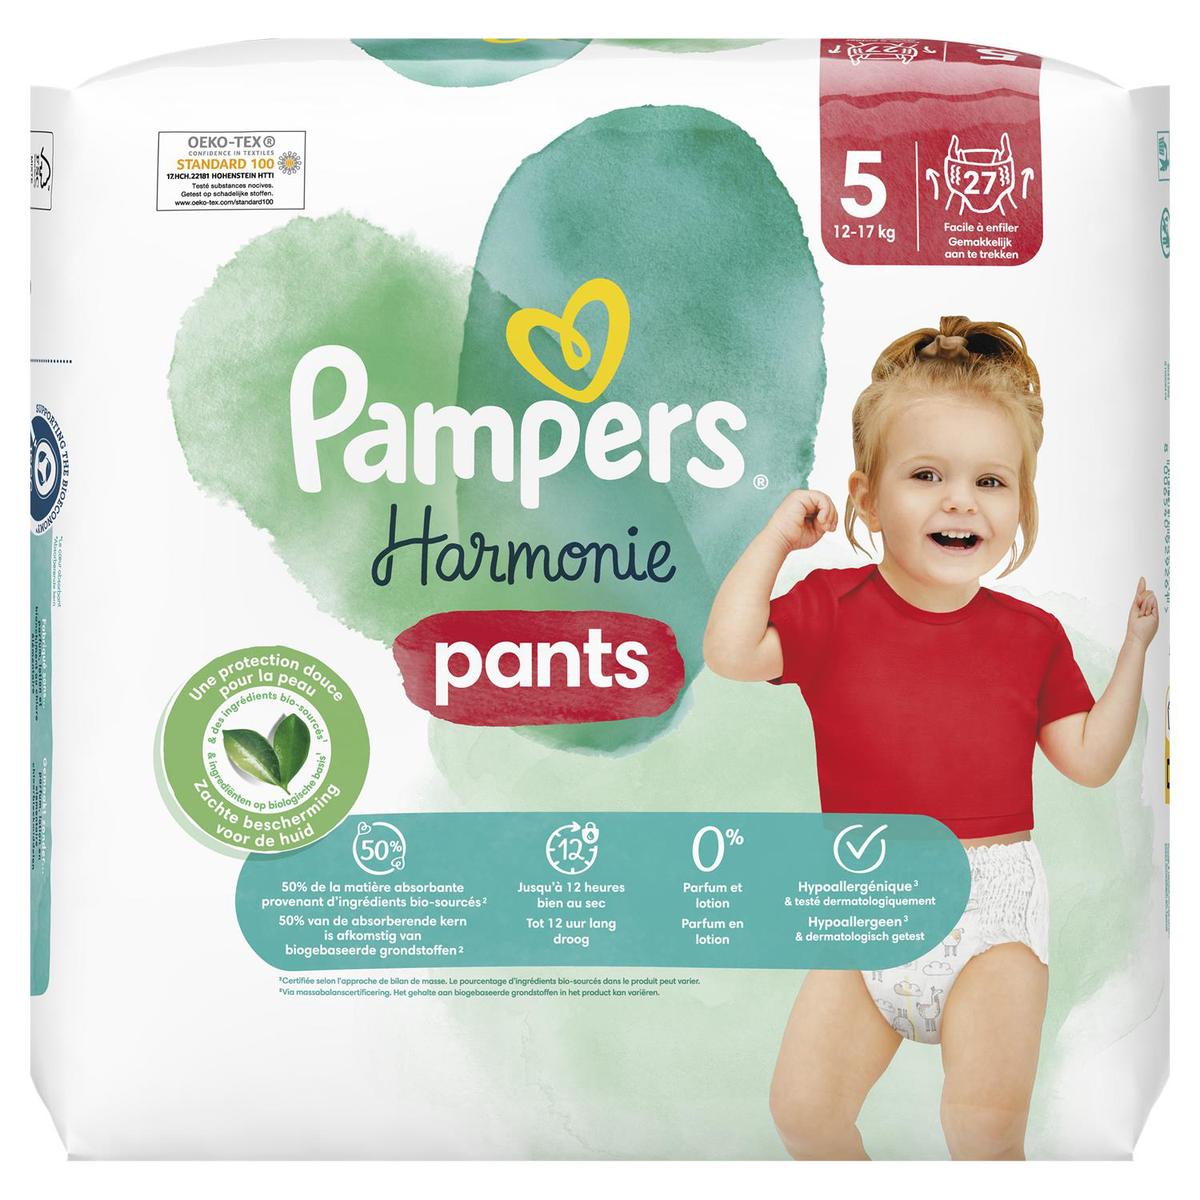 Pampers Harmonie Pants Couches culottes T5 11-16kg, 27 couches-culottes